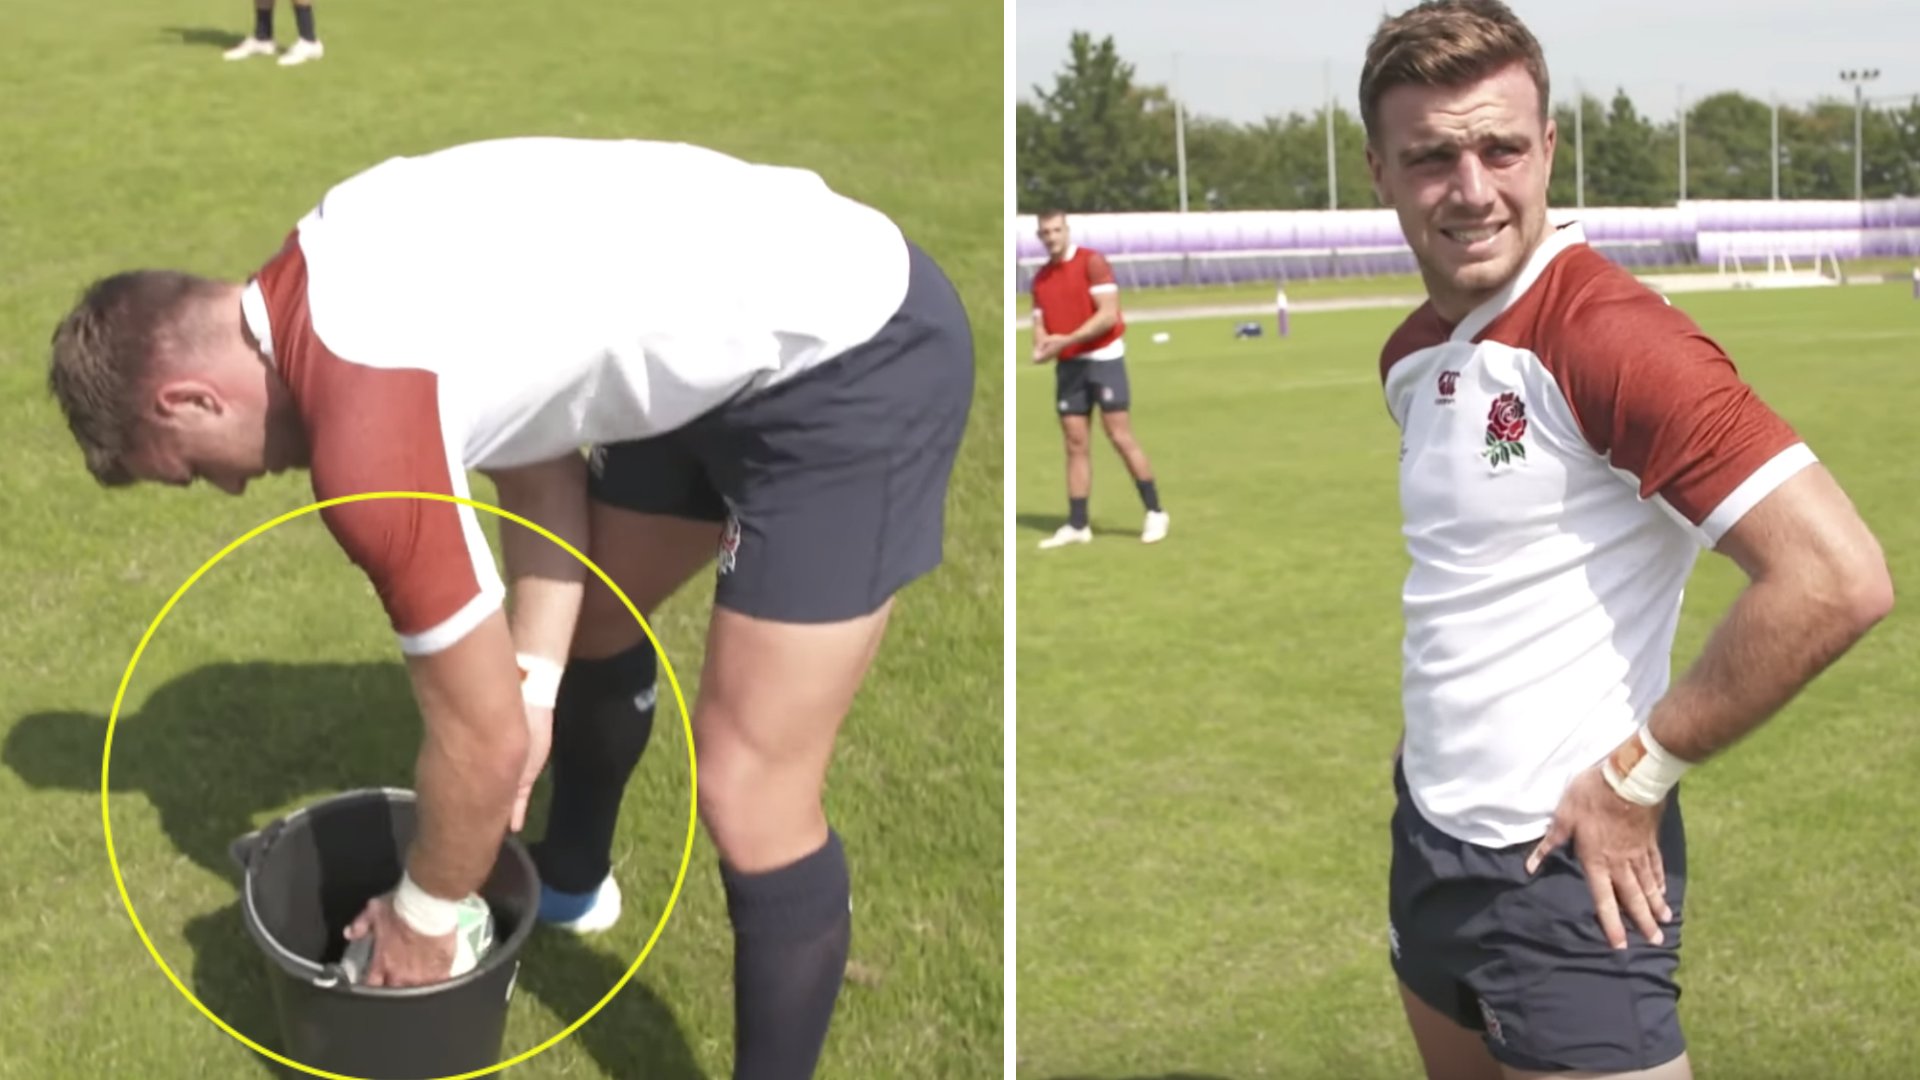 England reveal how they're dealing with the Rugby World Cup humidity in brand new video